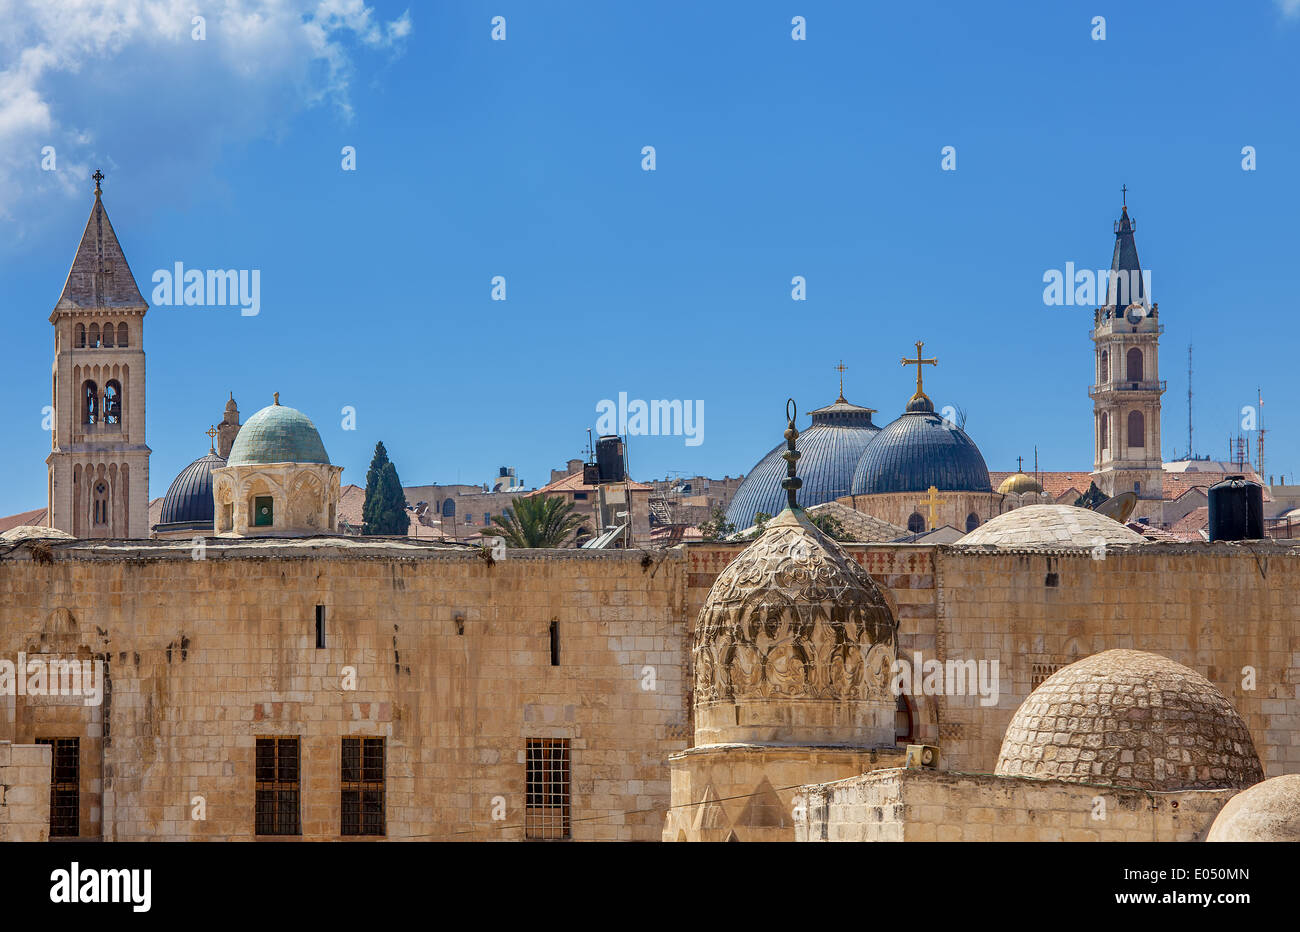 Belfries and domes of christian churches and minarets of mosques under blue sky in Jerusalem, Israel. Stock Photo